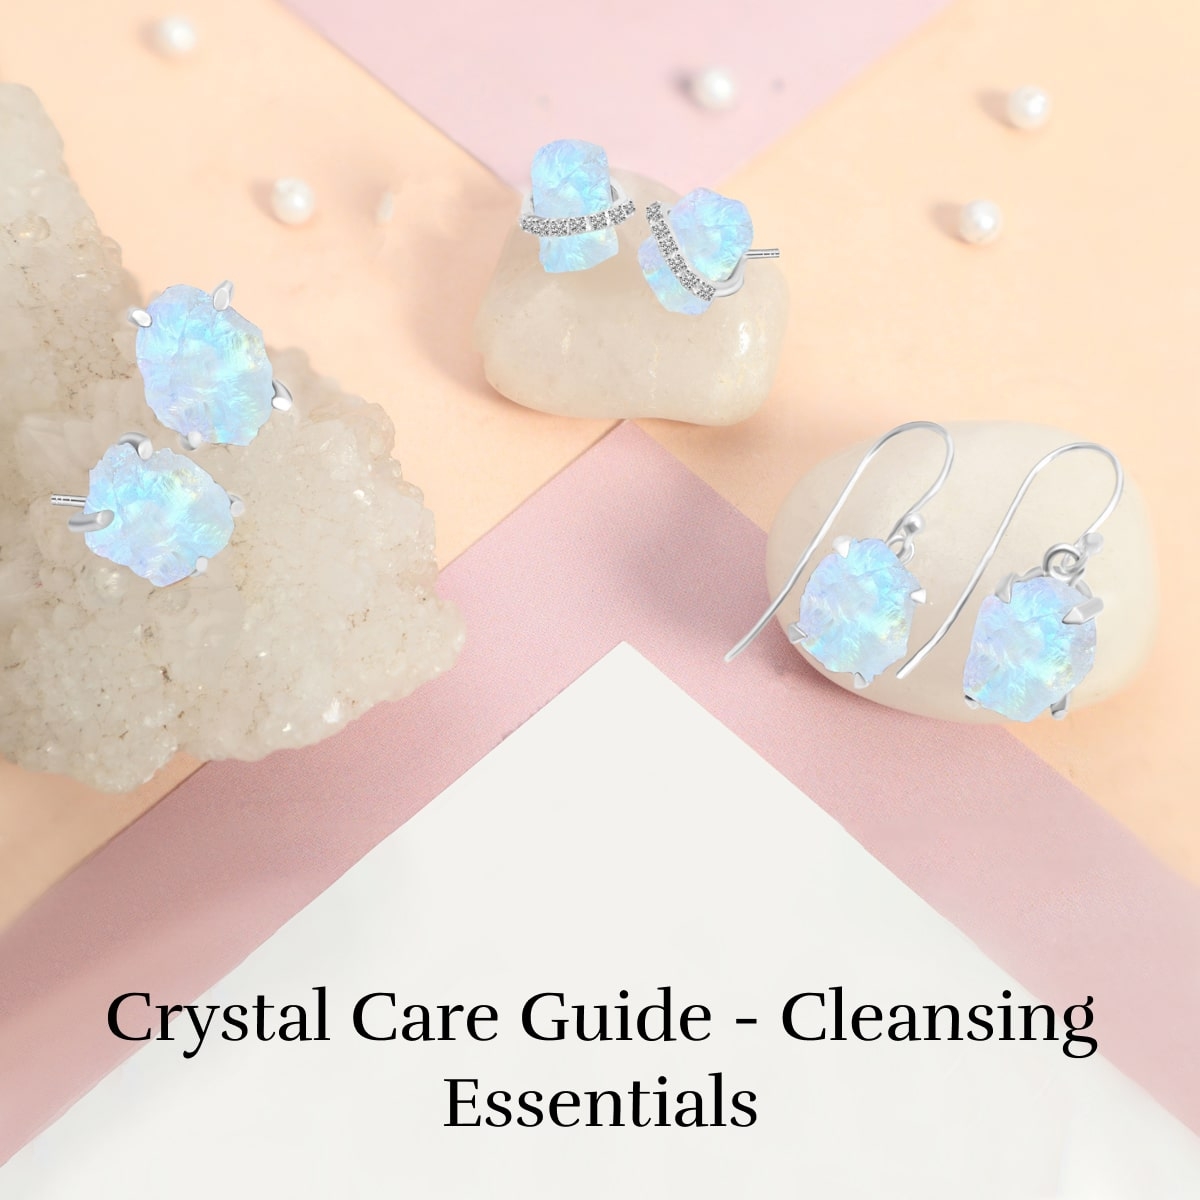 How to Cleanse Your Favorite Crystals